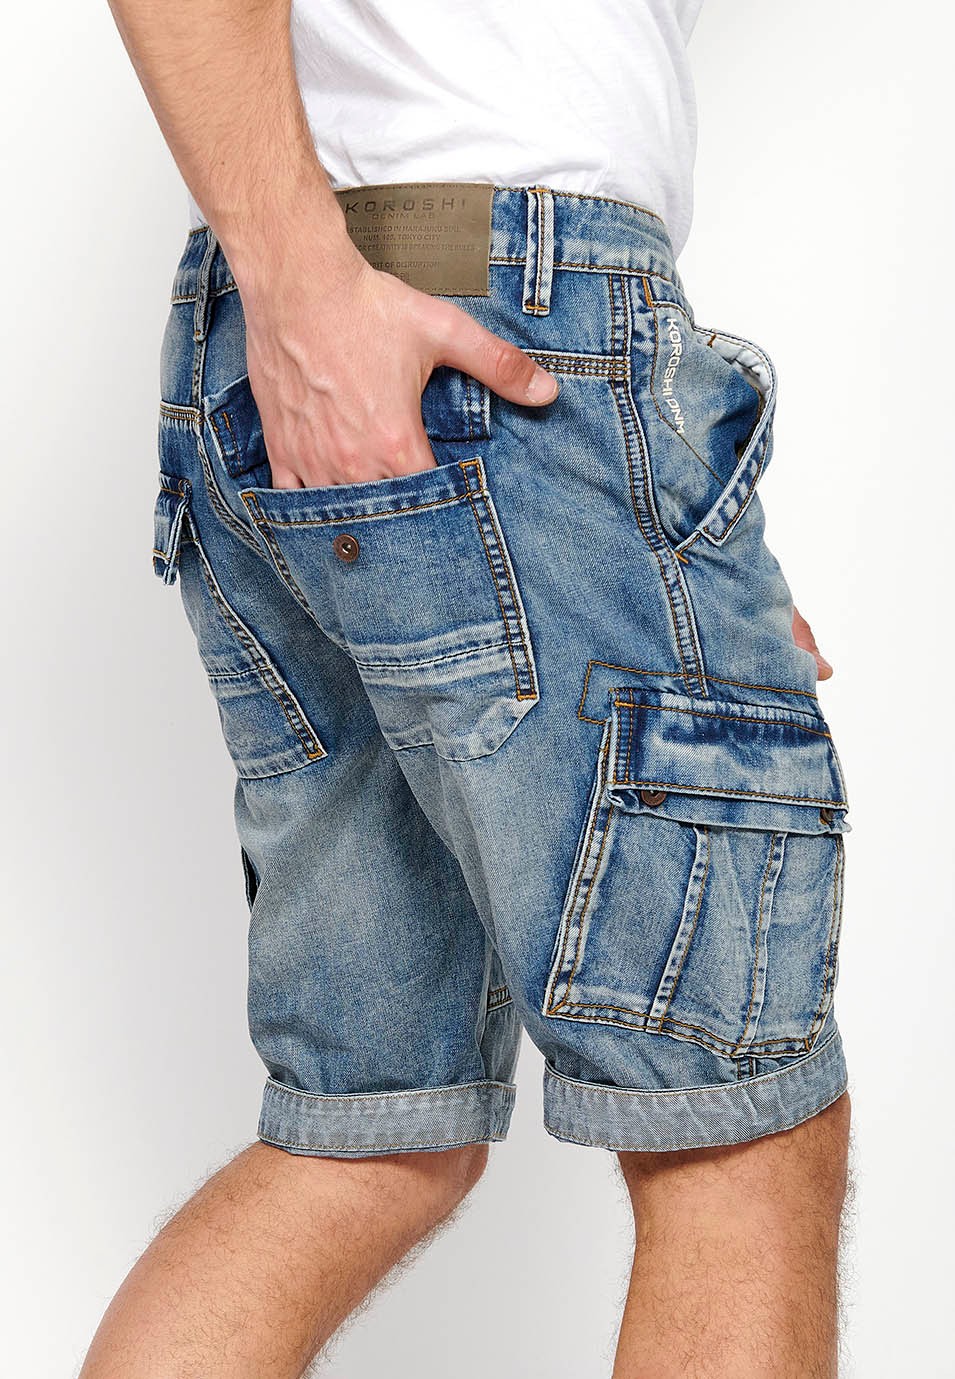 Denim Bermuda cargo shorts with front zipper and button closure with five pockets, one blue pocket pocket for Men 3